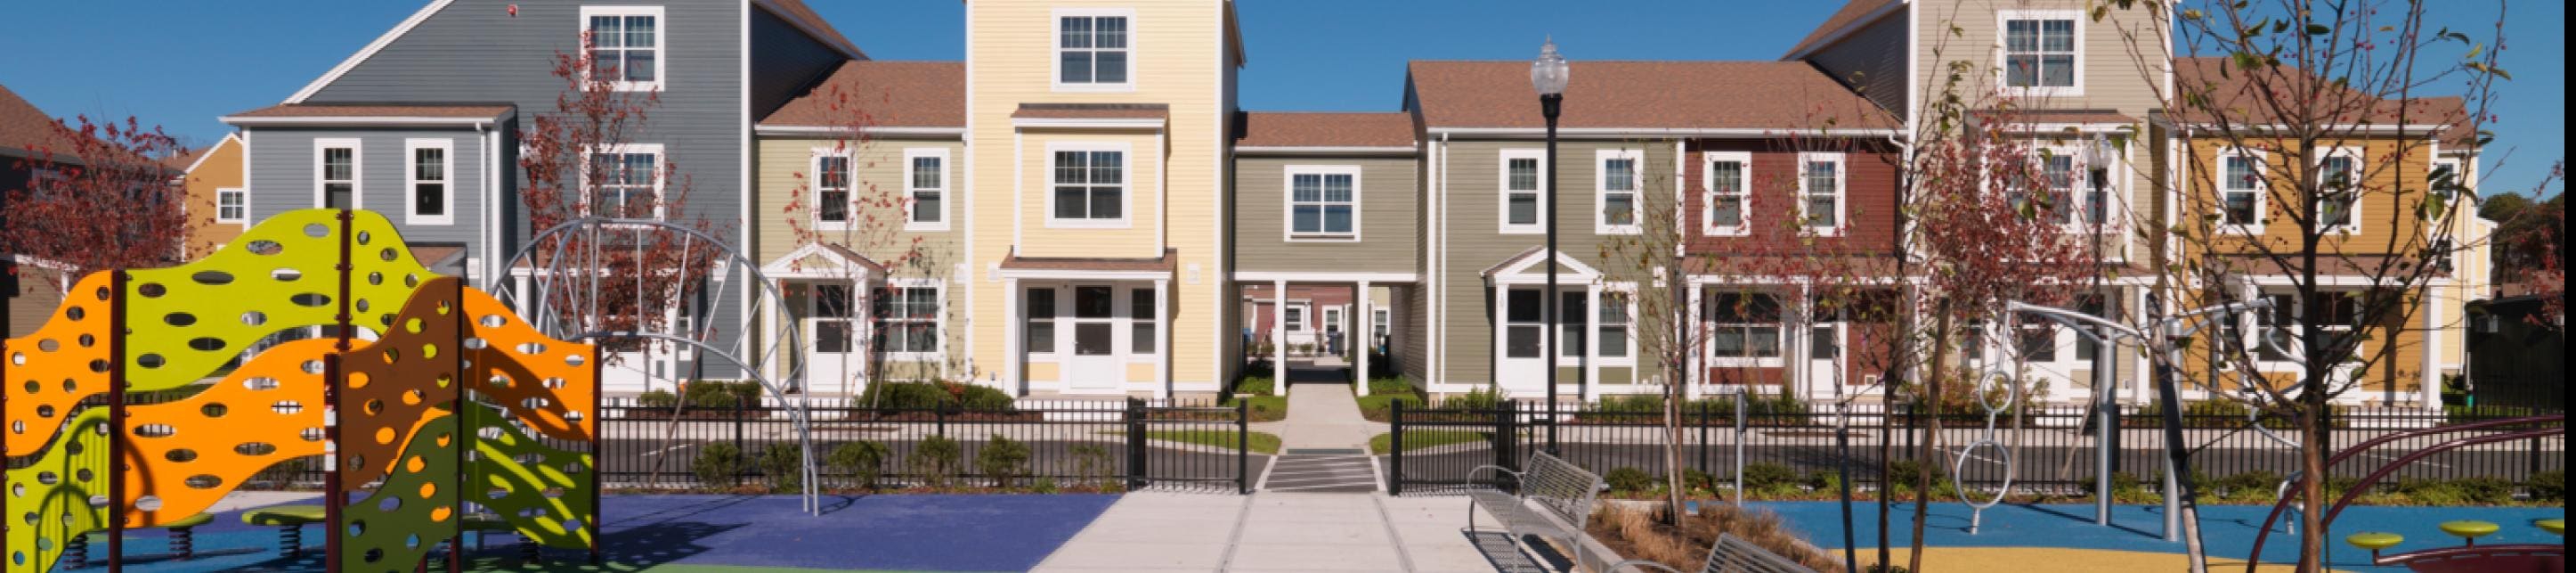 an exterior shot of a row of townhomes